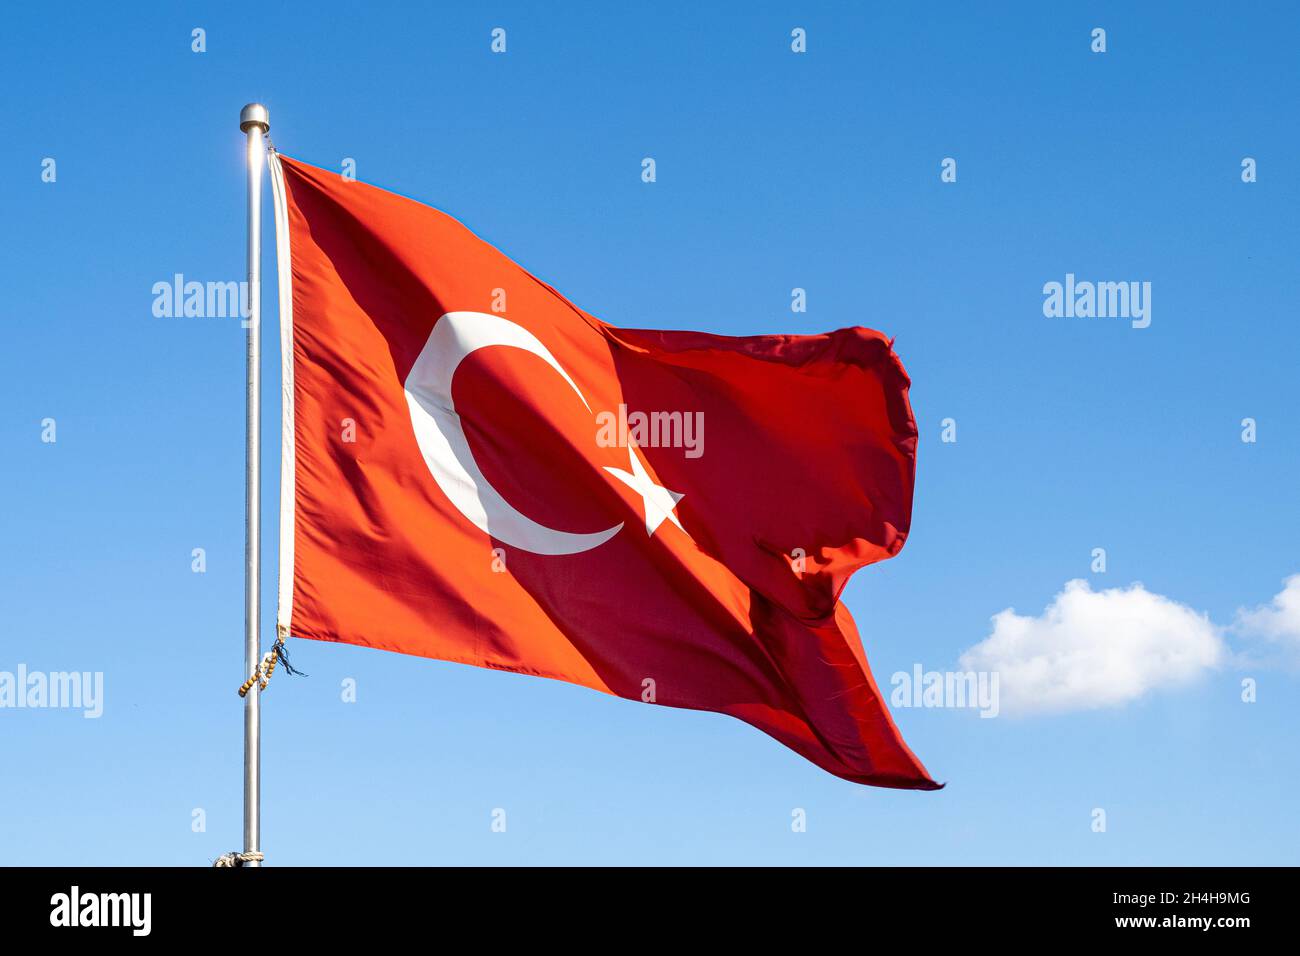 Turkish flag or flag of Turkey waving on flagpole against blue sky in Istanbul. Space for text. Stock Photo